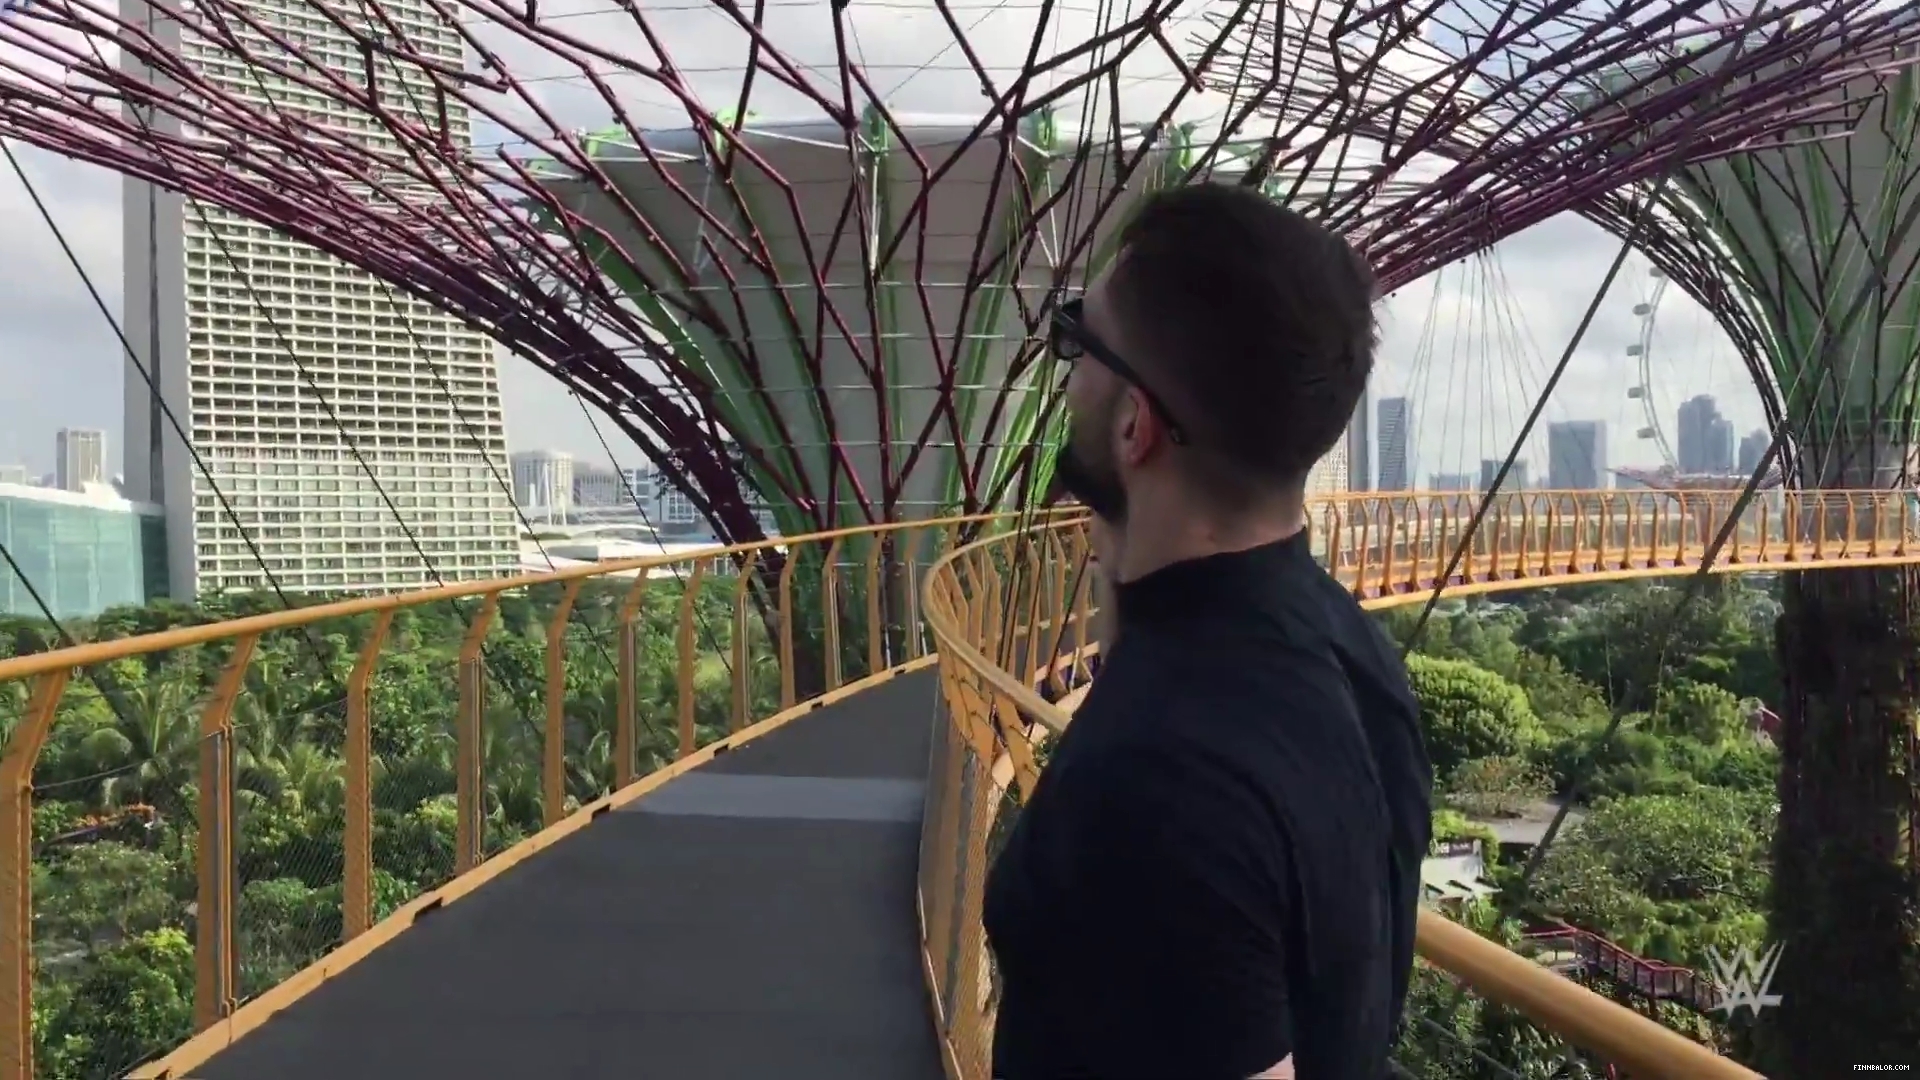 Finn_Balor_feels_like_he_is_in__Star_Wars__while_touring_Singapore_s_Supertree__mp40025.jpg